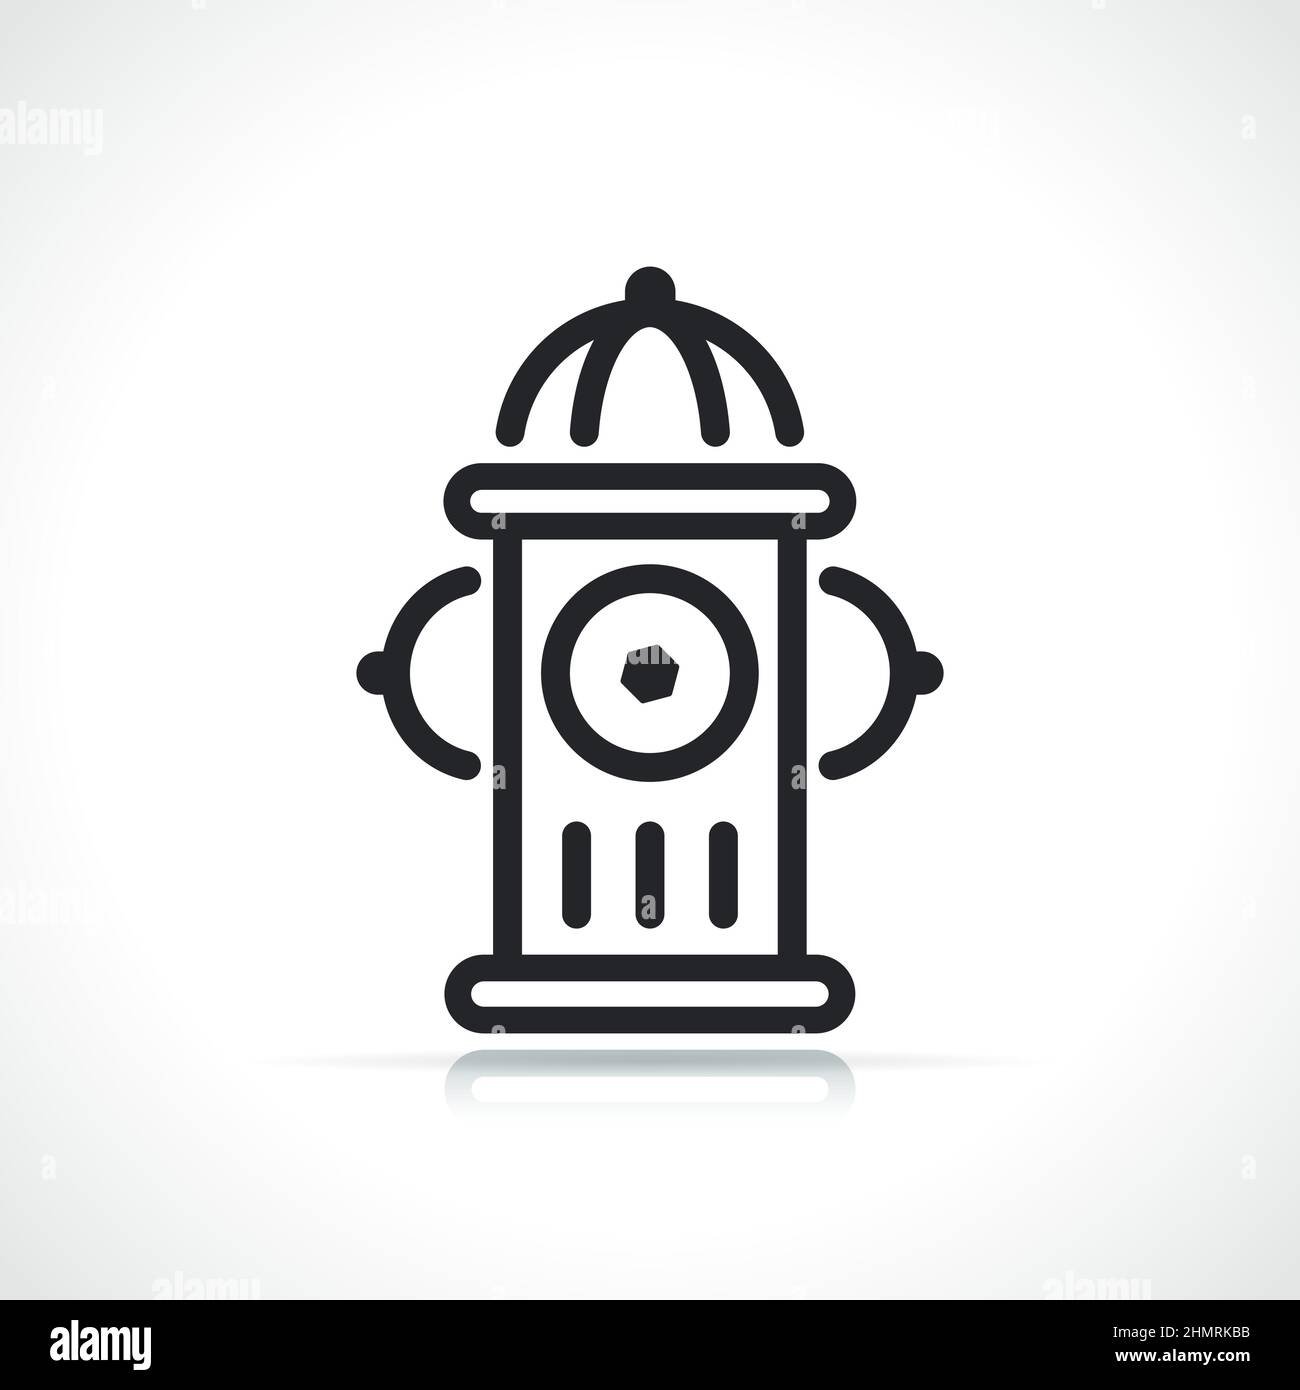 fire hydrant thin line icon isolated design Stock Vector